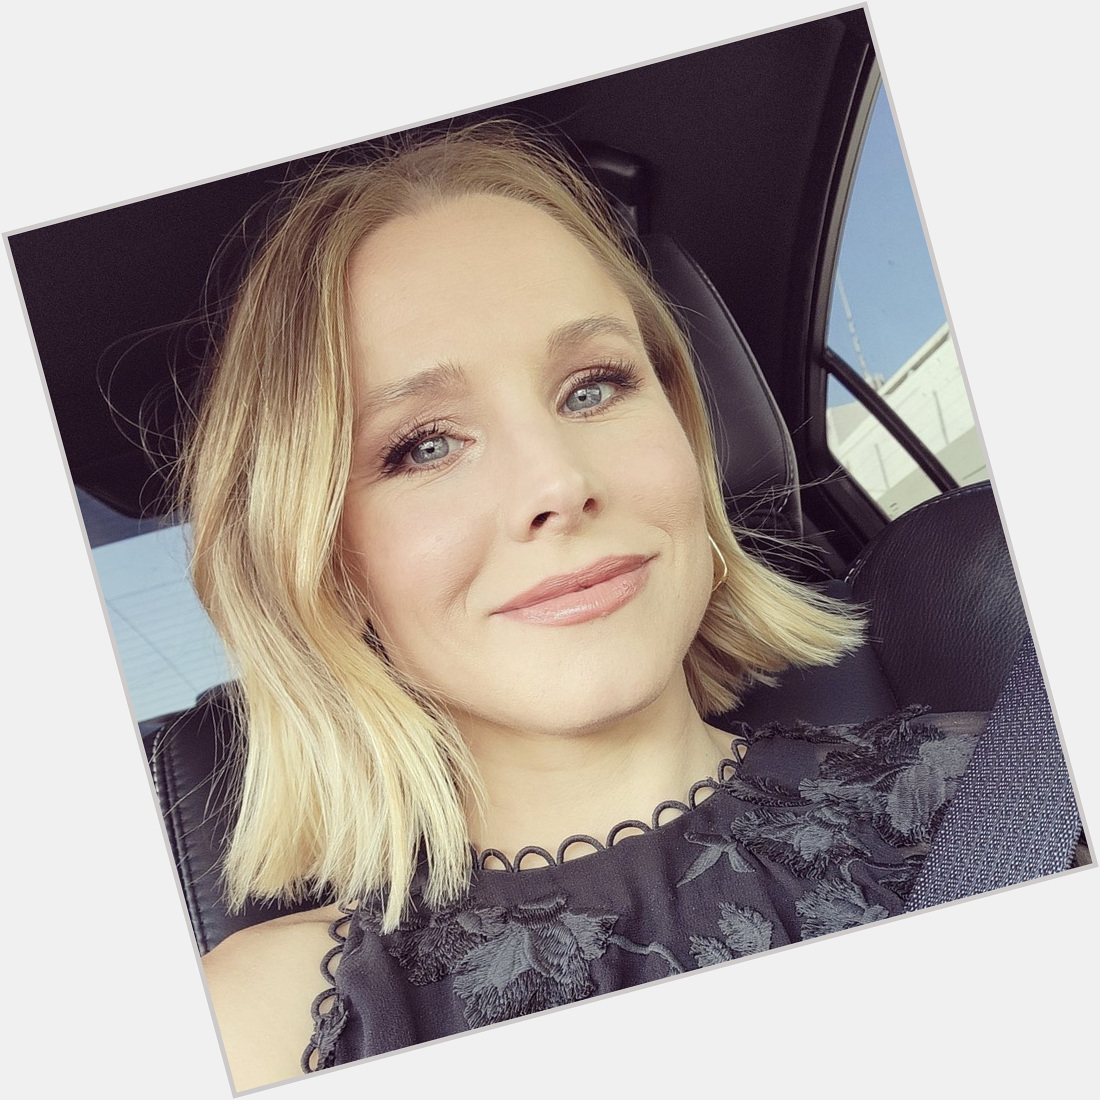 Happy Birthday to this beautiful lady, Kristen Bell!  